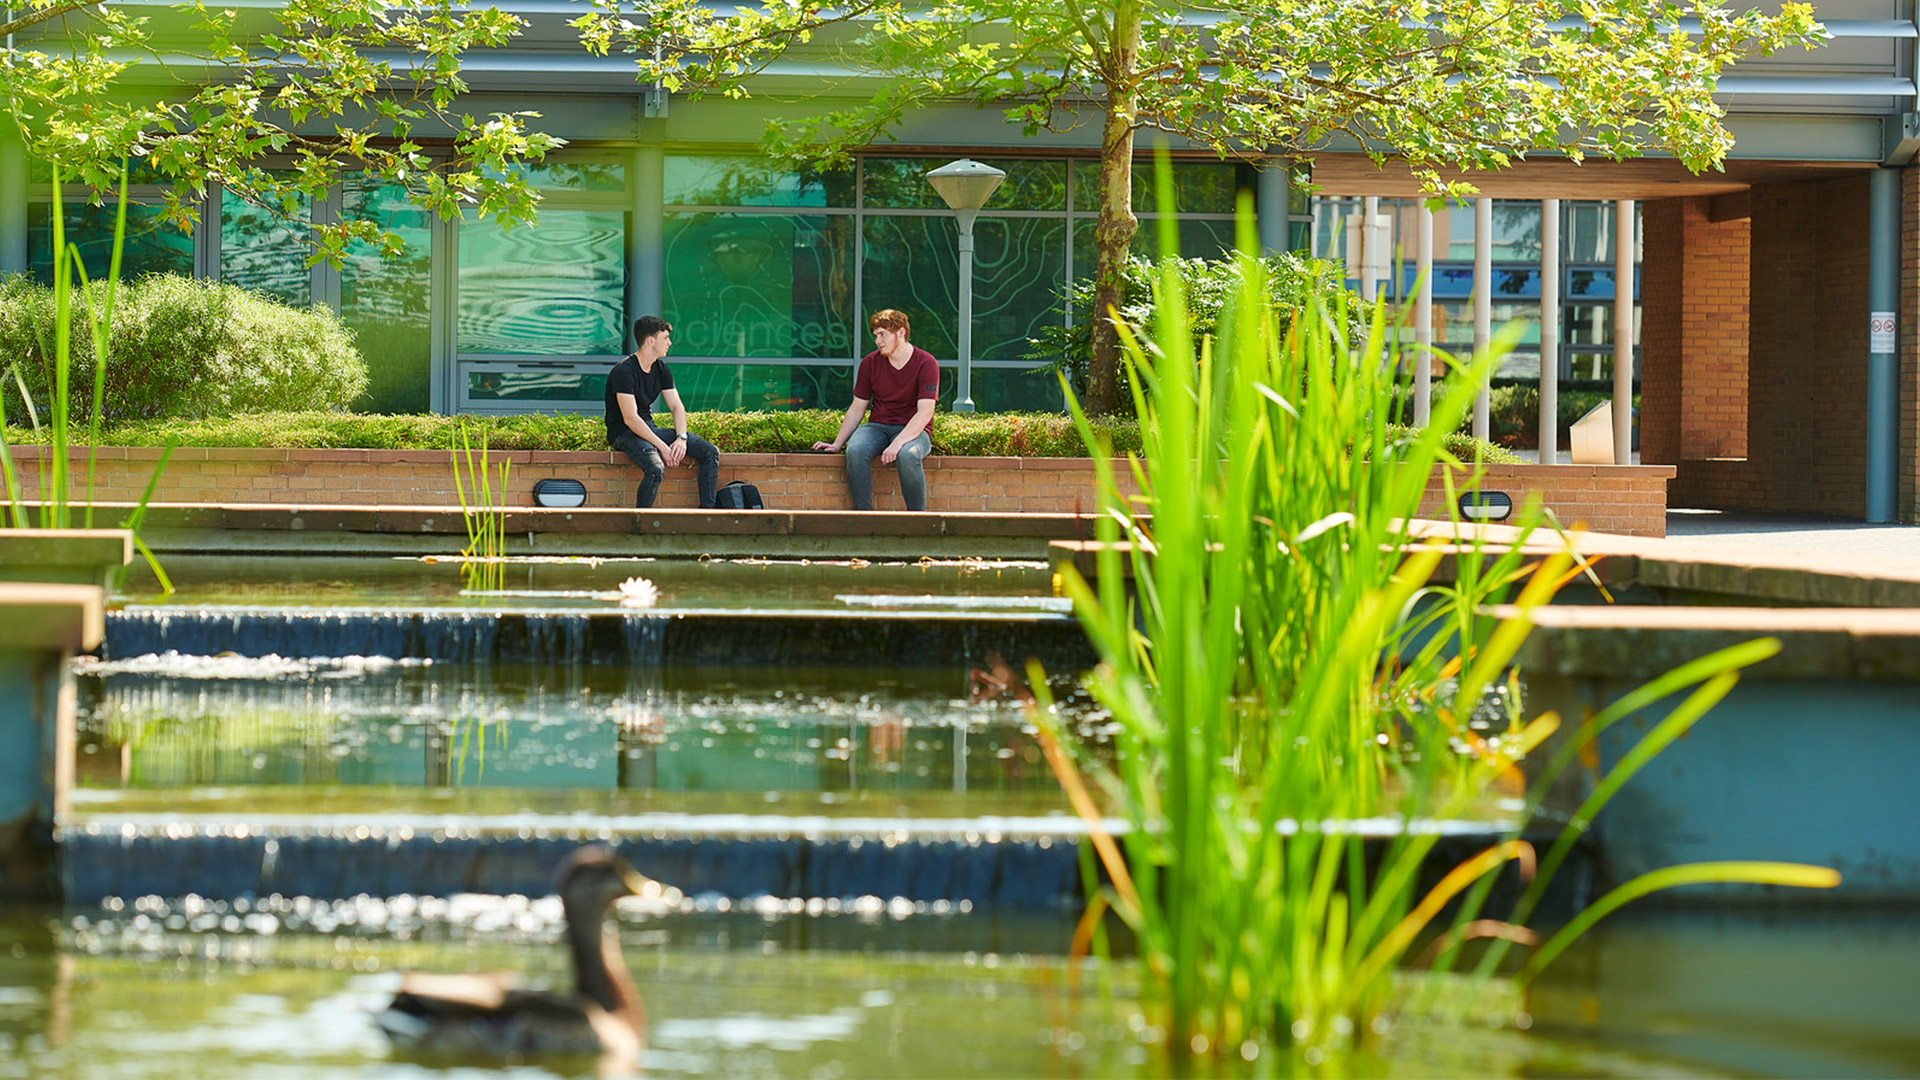 The outside of the Geosciences lab with pond and nature surrounding it